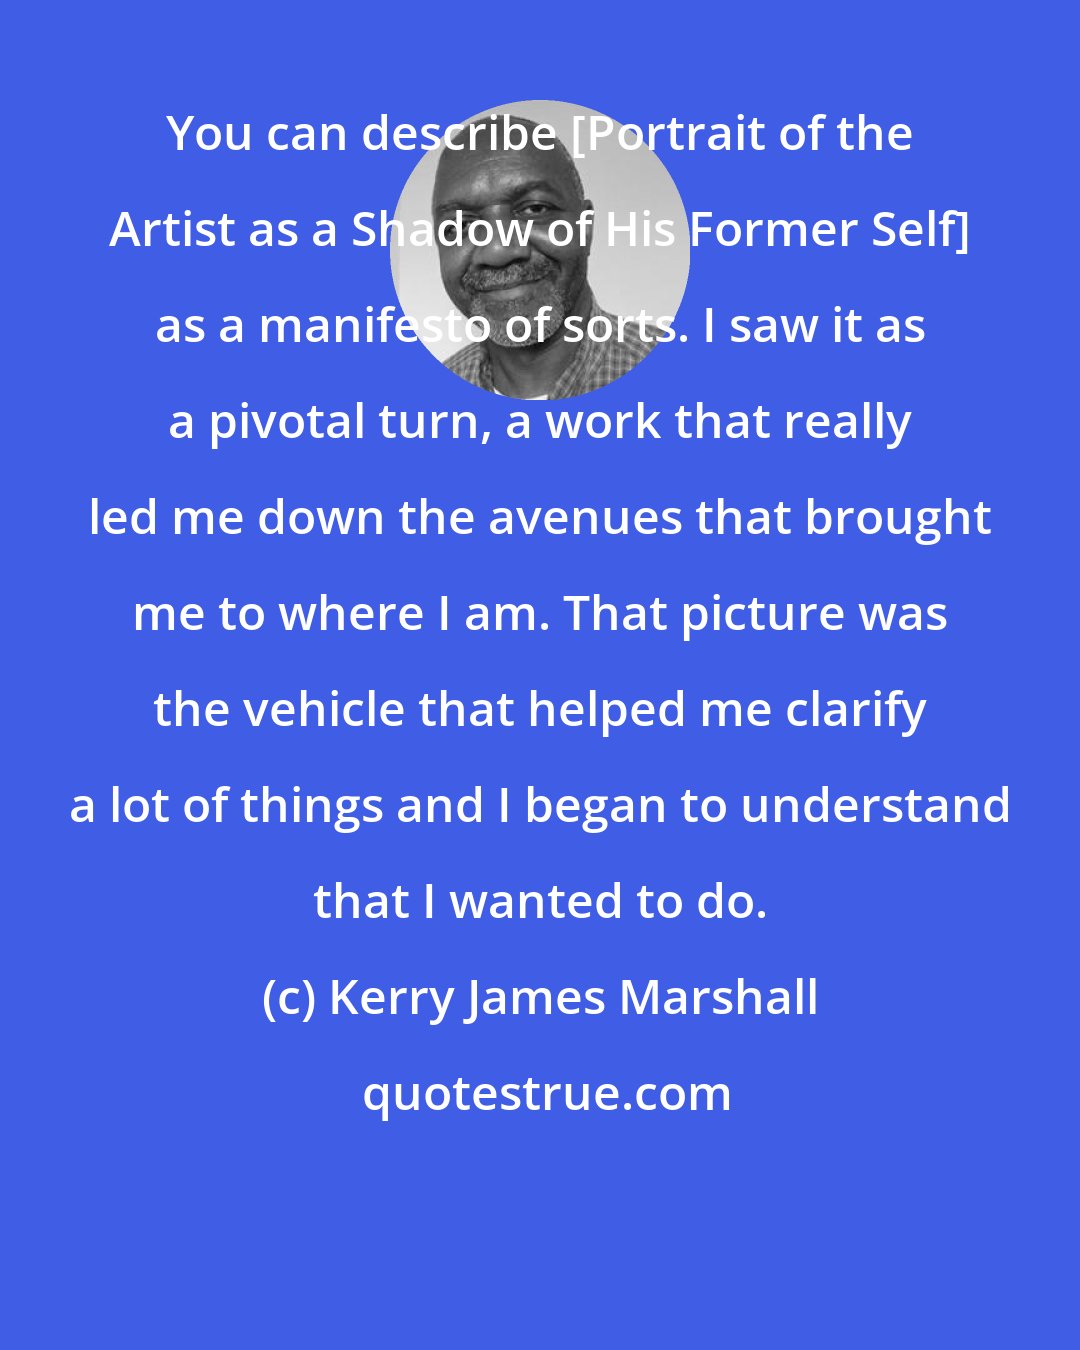 Kerry James Marshall: You can describe [Portrait of the Artist as a Shadow of His Former Self] as a manifesto of sorts. I saw it as a pivotal turn, a work that really led me down the avenues that brought me to where I am. That picture was the vehicle that helped me clarify a lot of things and I began to understand that I wanted to do.